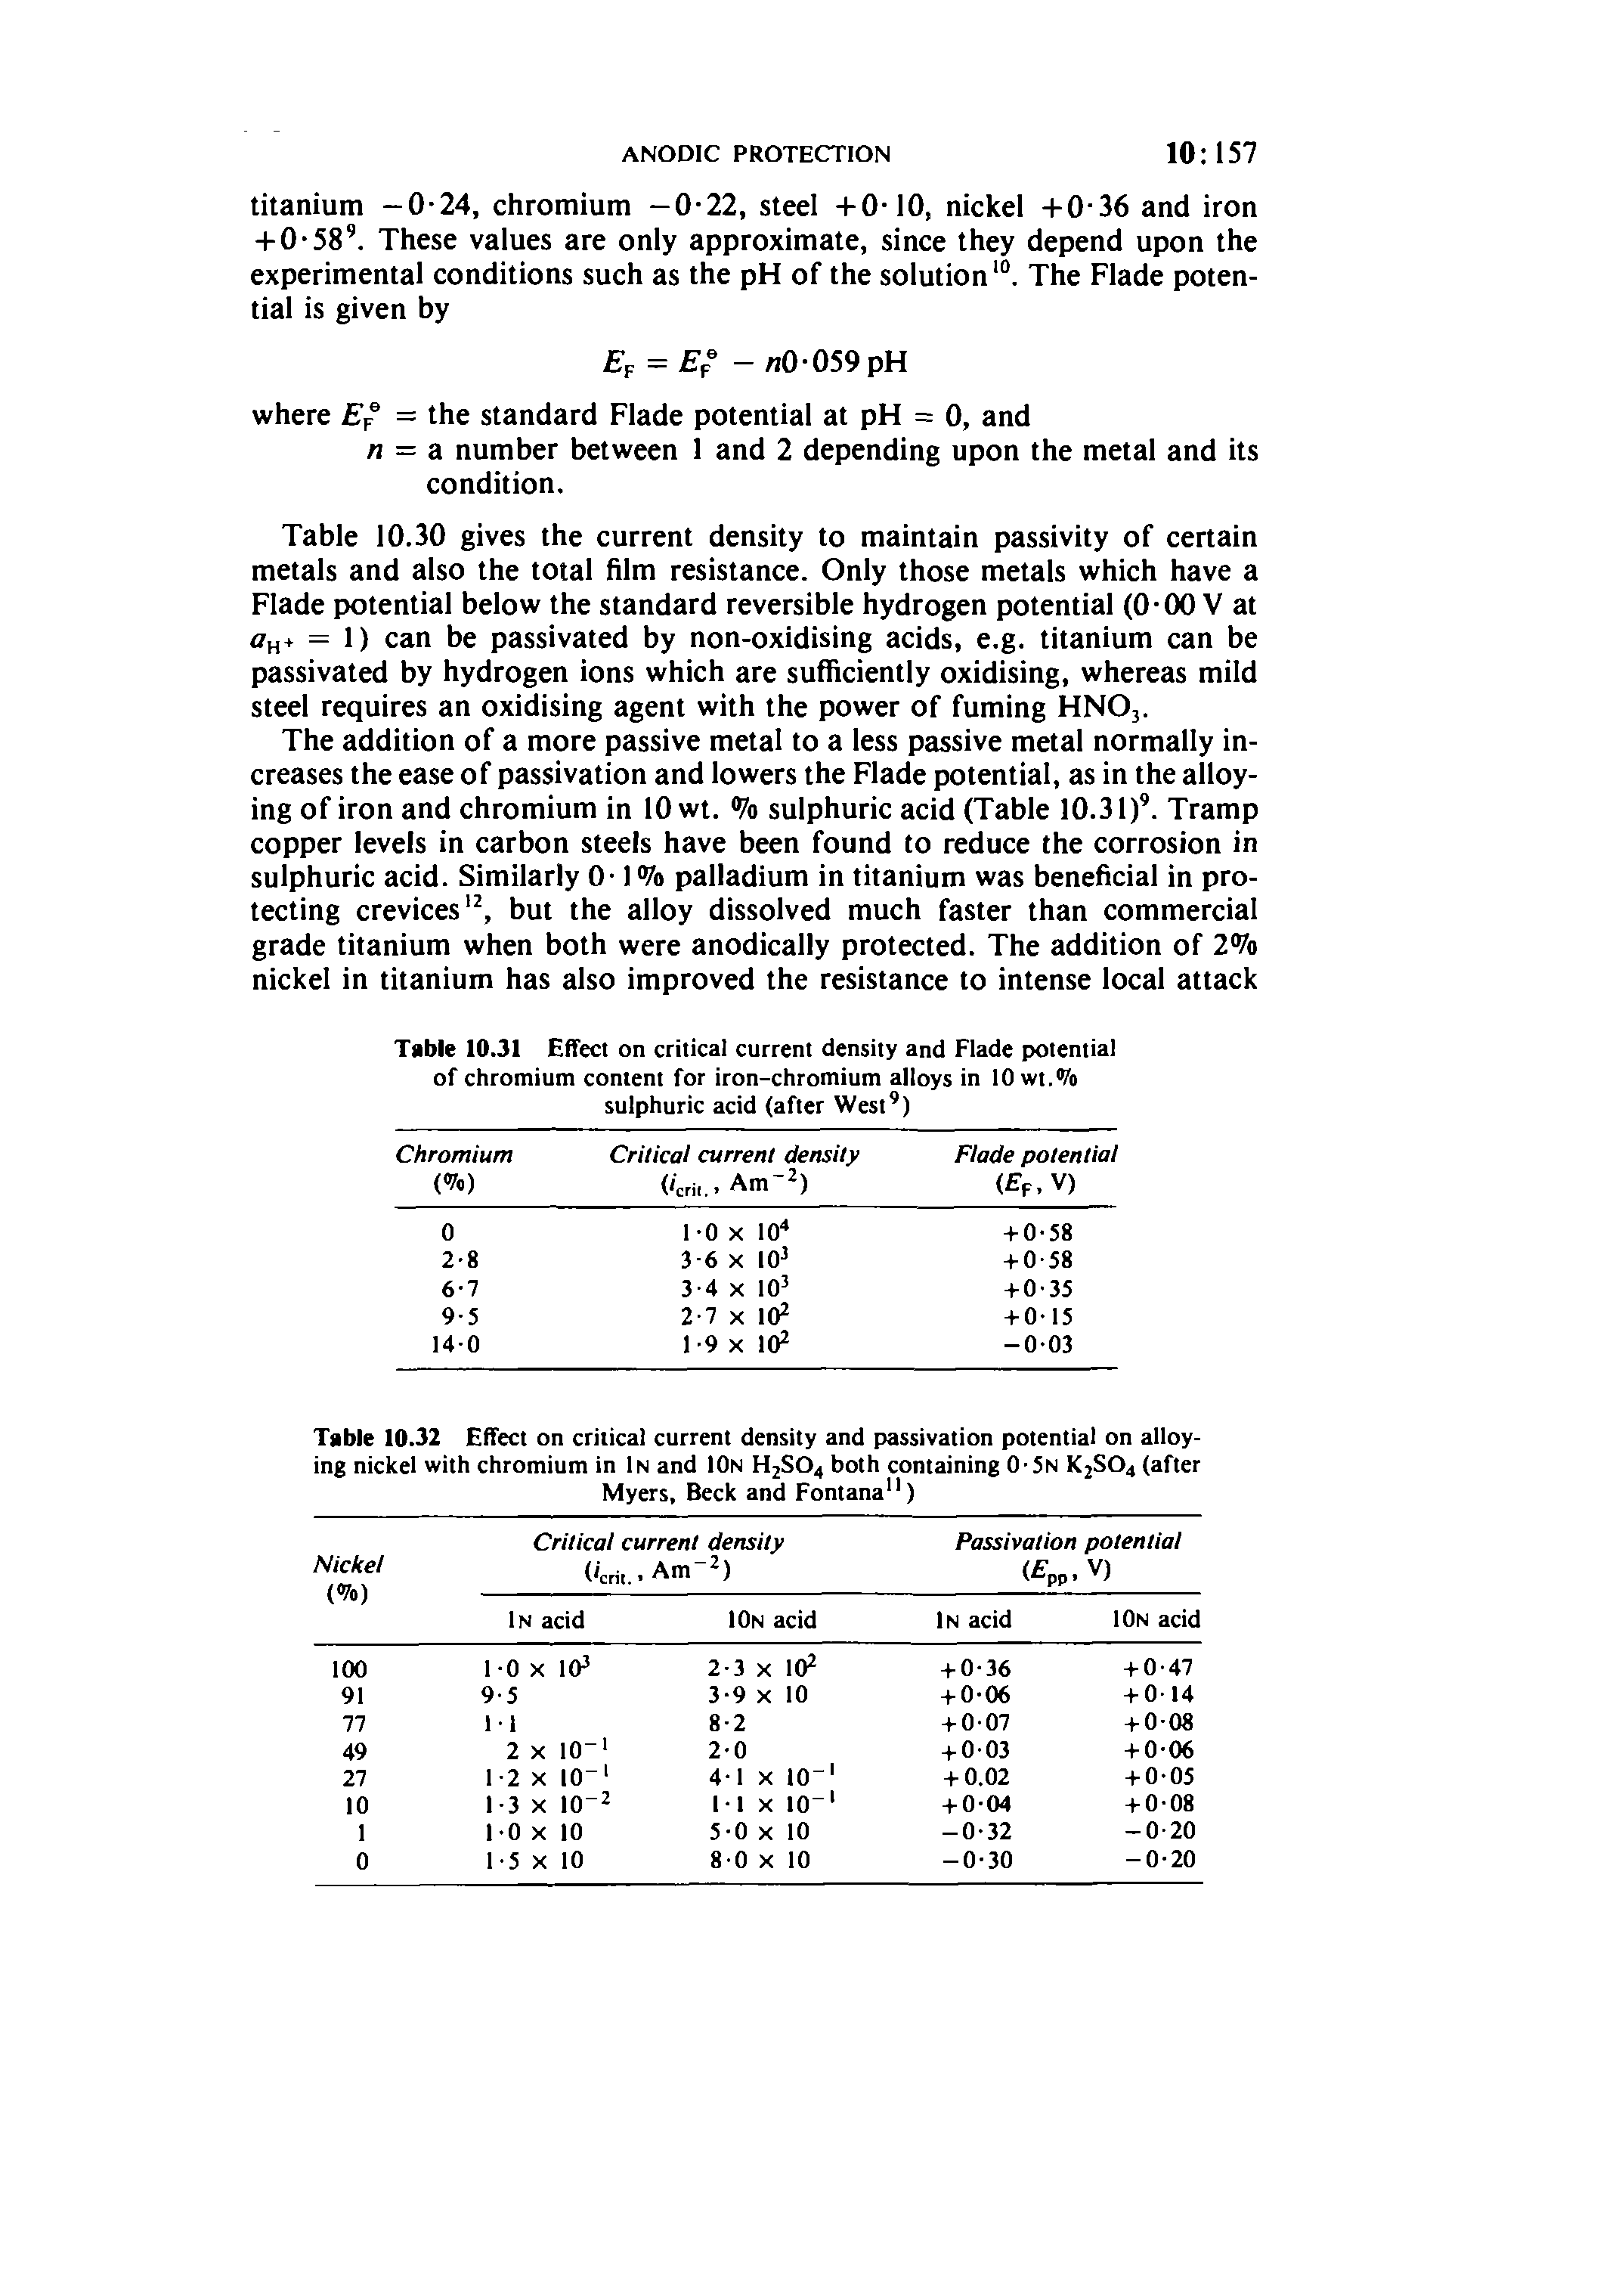 Table 10.32 Effect on critical current density and passivation potential on alloying nickel with chromium in In and IOn H2SO4 both containing 0-5N K2SO4 (after Myers, Beck and Fontana")...